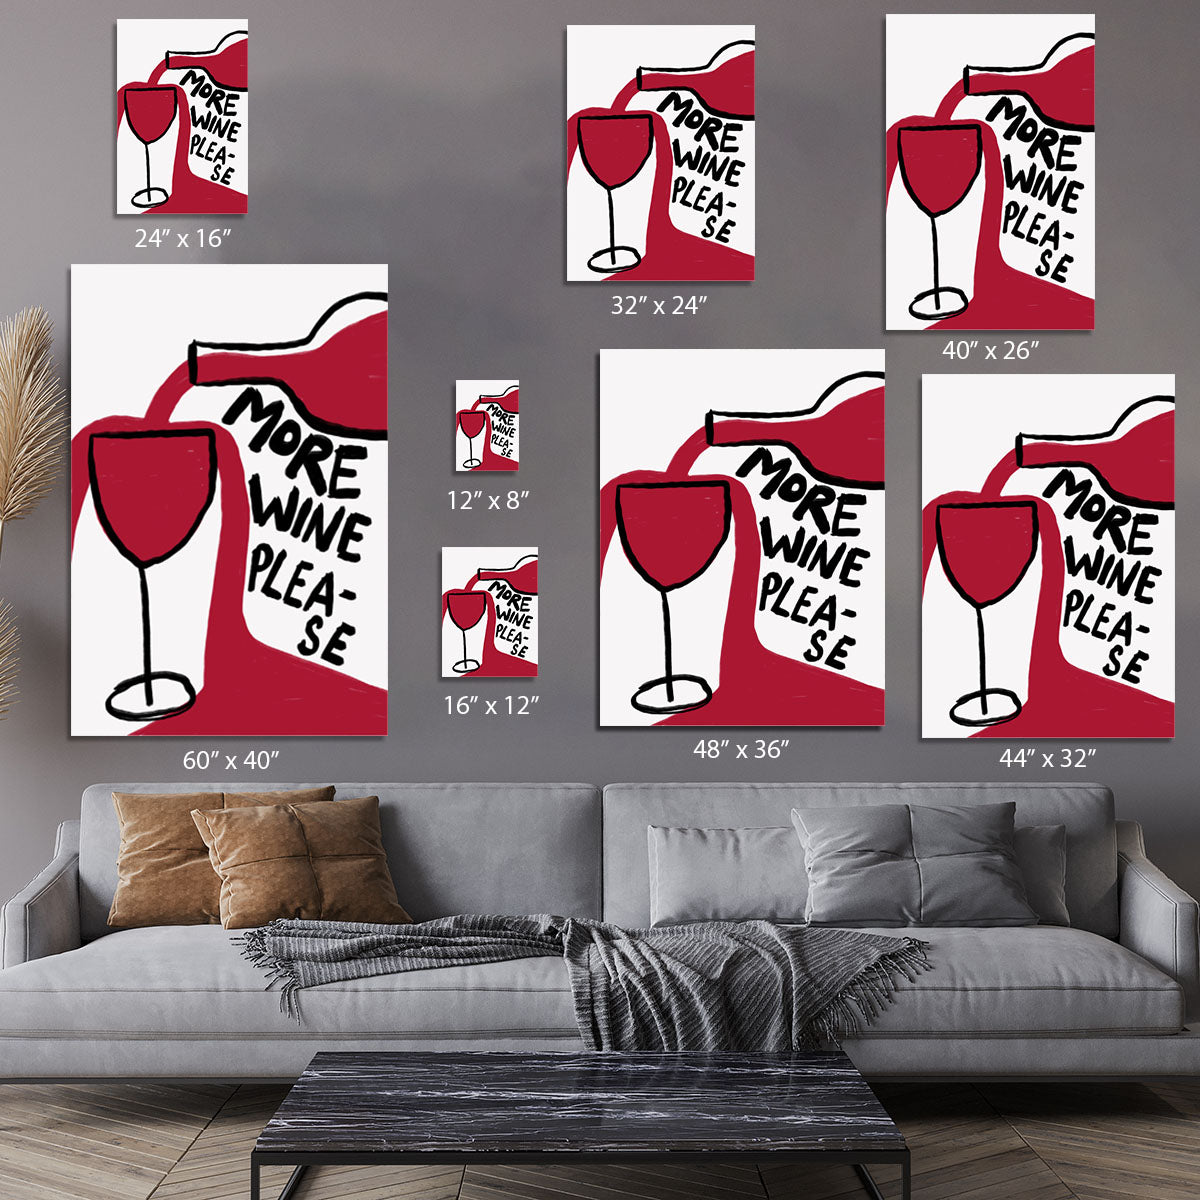 More Wine Please Canvas Print or Poster - Canvas Art Rocks - 7